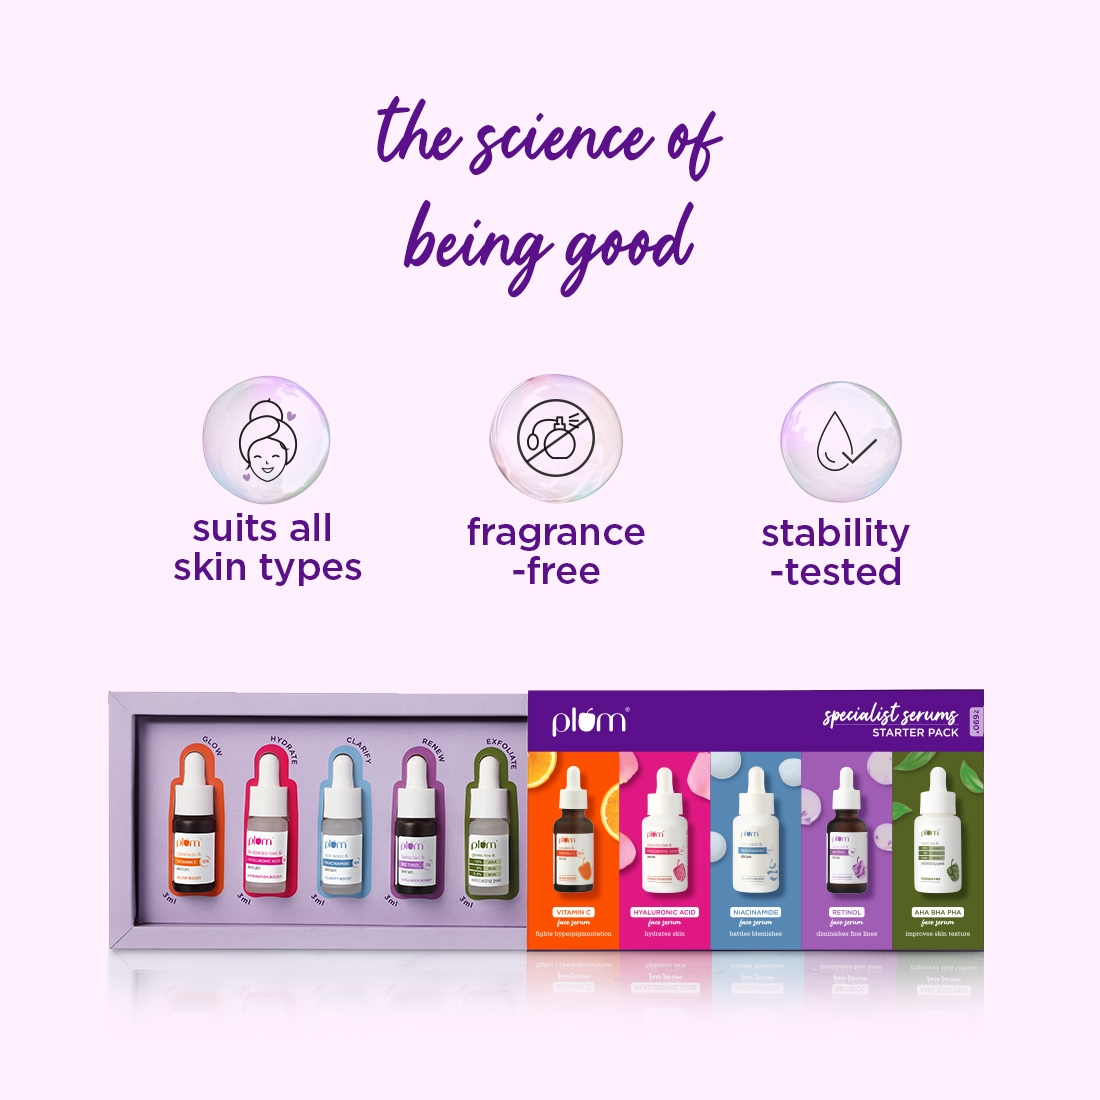 Plum Be Good | Specialist Serums - Starter Pack | Set of 3 Mini Serums | Vitamin C, Hyaluronic & Niacinamide |For Glowing, Hydrated, Clear Skin | All Skin Types | Fragrance-Free | 100% Vegan 10